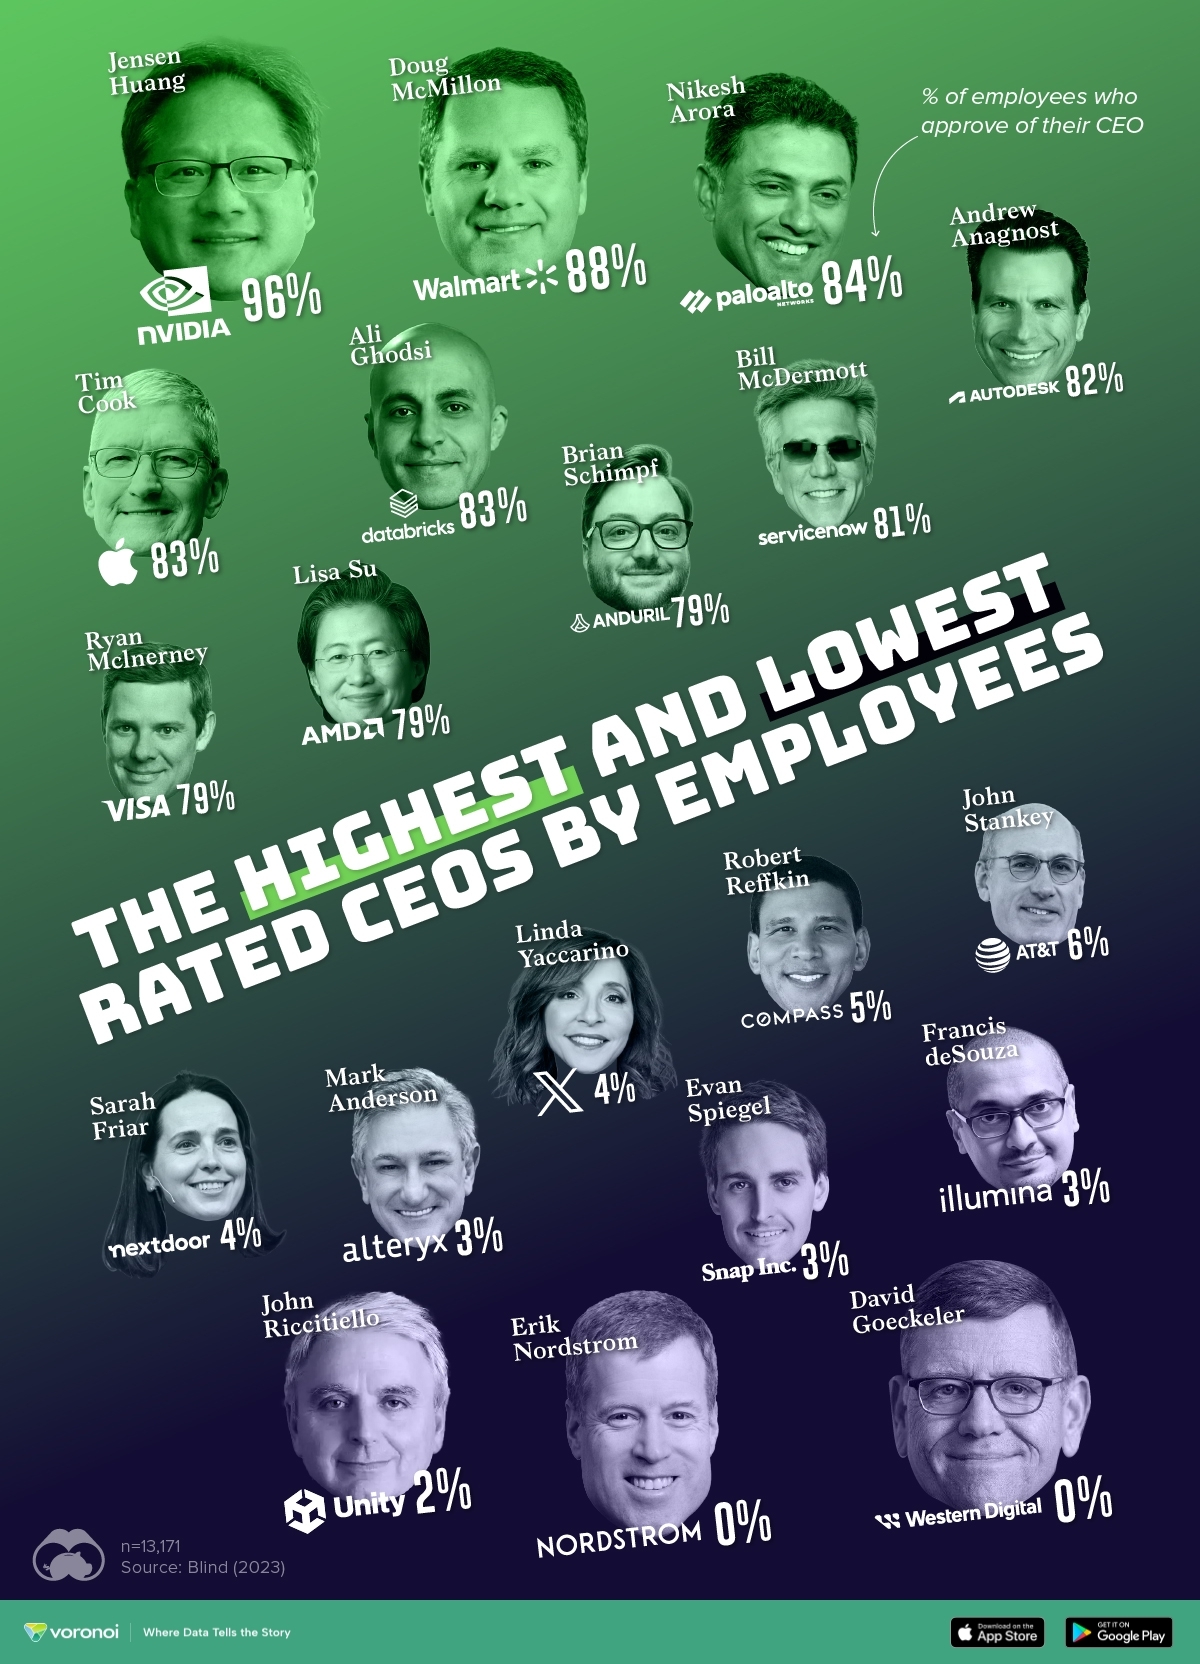 A chart of the highest and lowest approval ratings of the 100+ most popular CEOs.